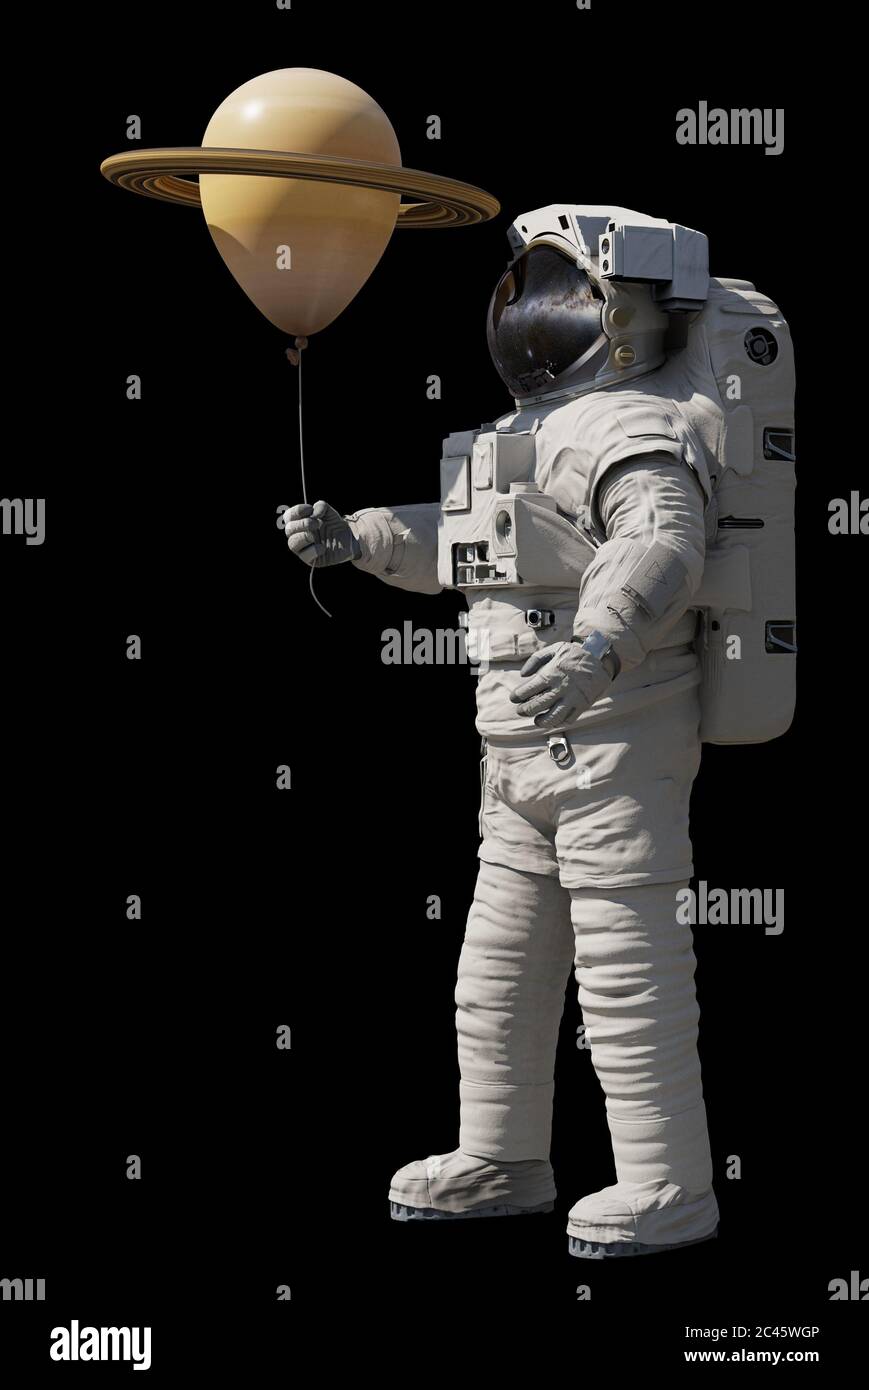 astronaut with planet Saturn balloon isolated on black background Stock Photo